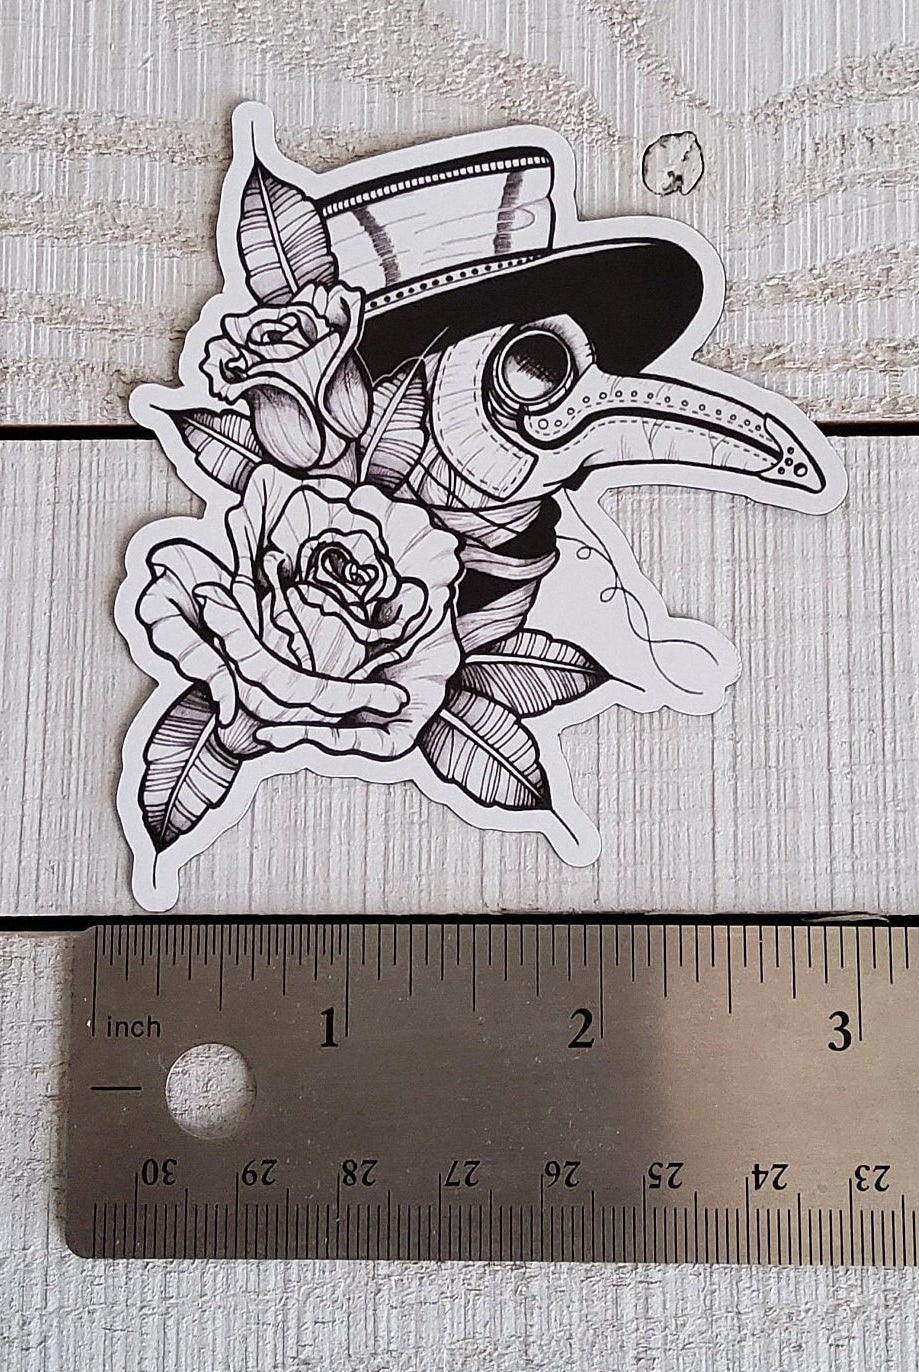 MAGNET: Plague Doctor , Plague Doctor and Roses Magnet , Plague Dr Magnet , Plague Doctor Art Magnet , Plague Doctor Decorative Magnet